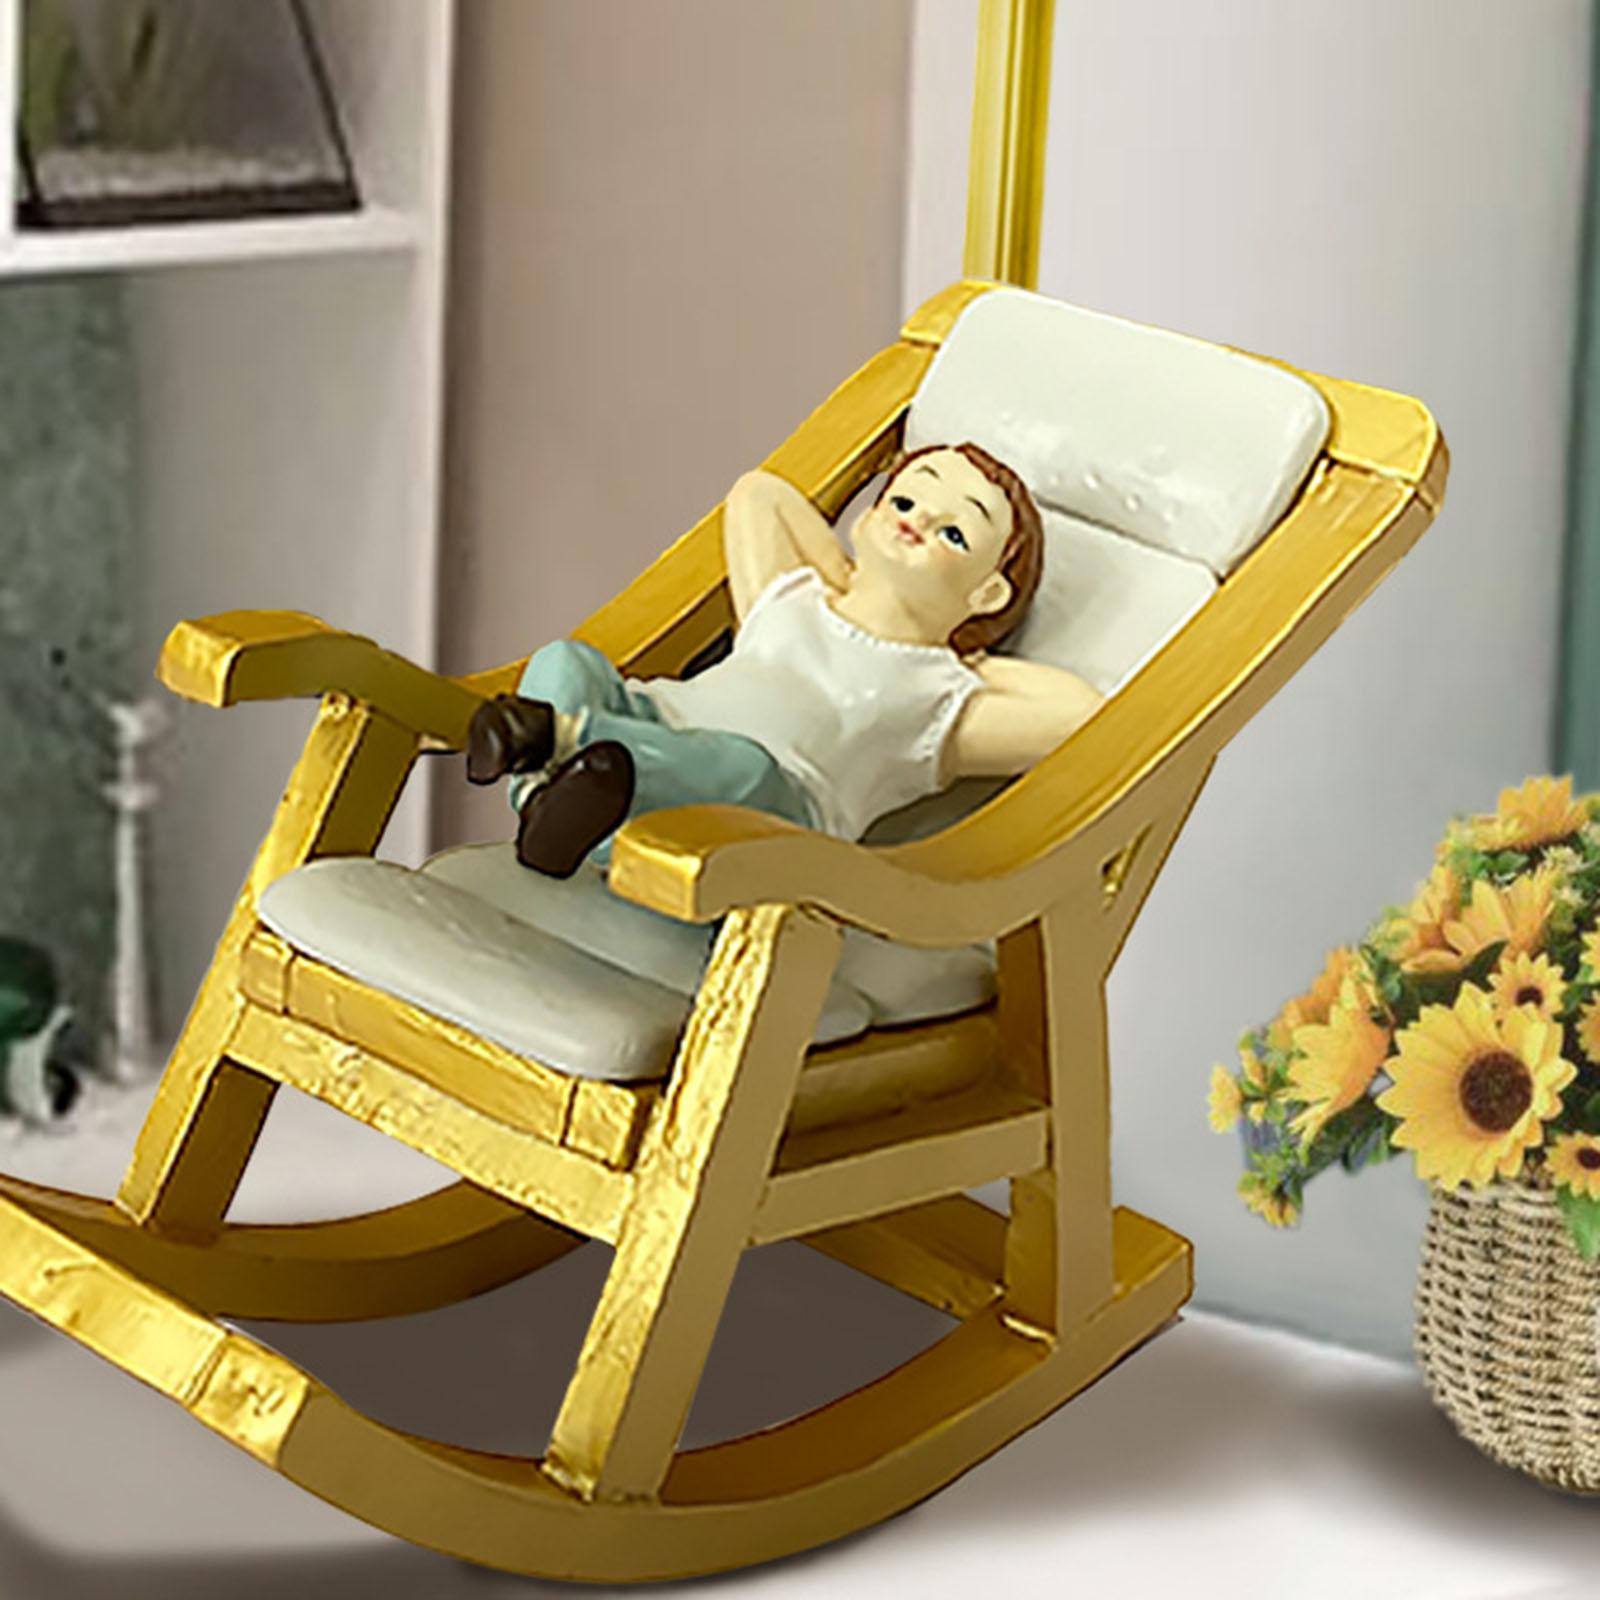 1:12 Mini Rocking Chair Accessories Toy for Photo Props Fairy Garden Bedroom Boy